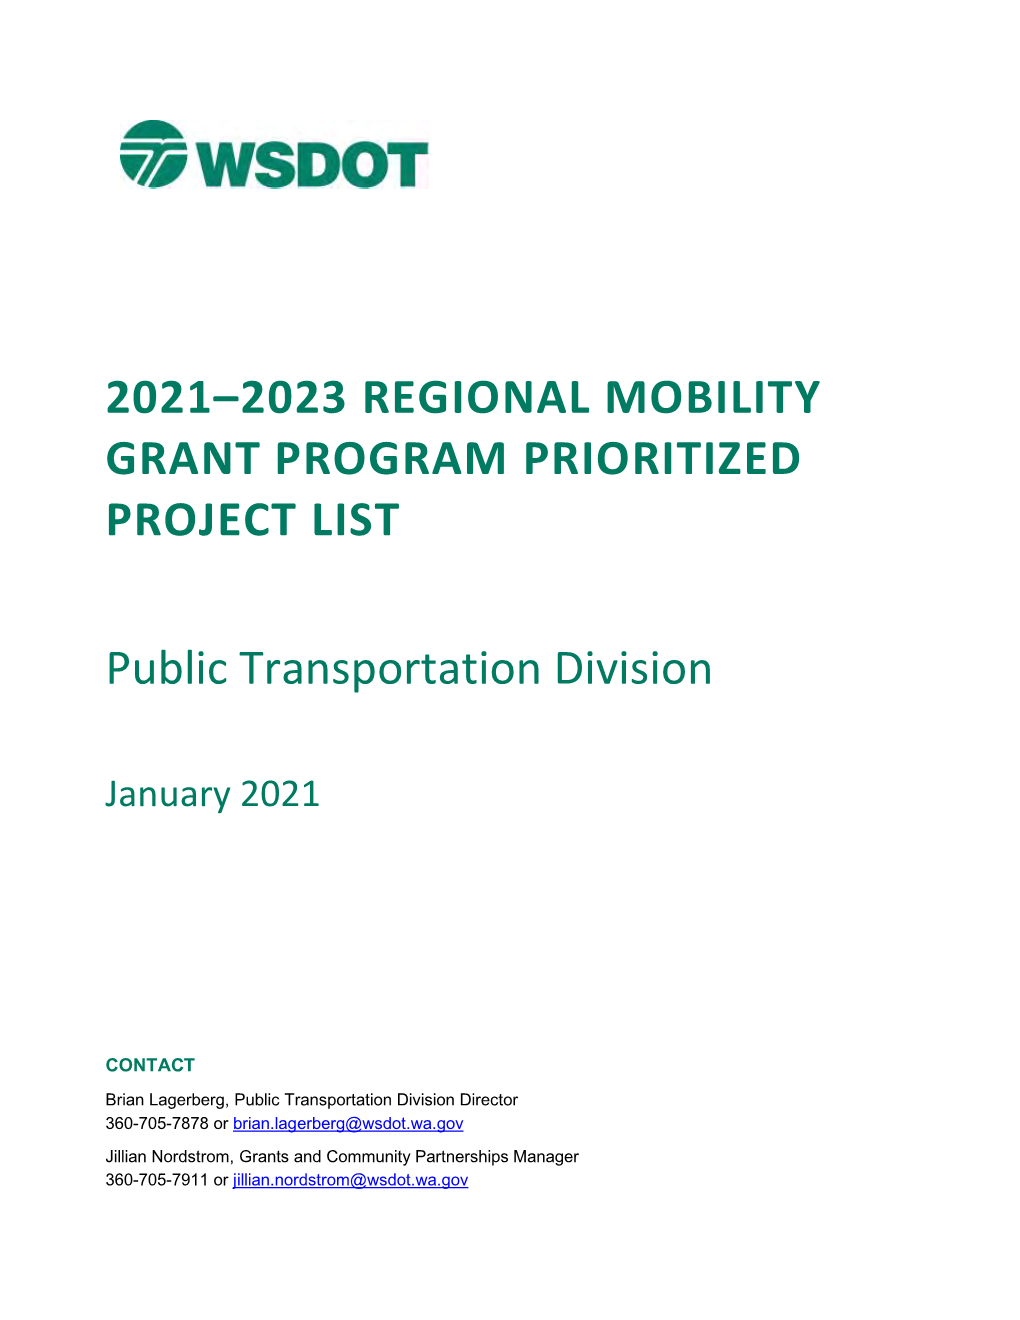 Regional Mobility Grant Program 2021-2023 Prioritized List of Projects